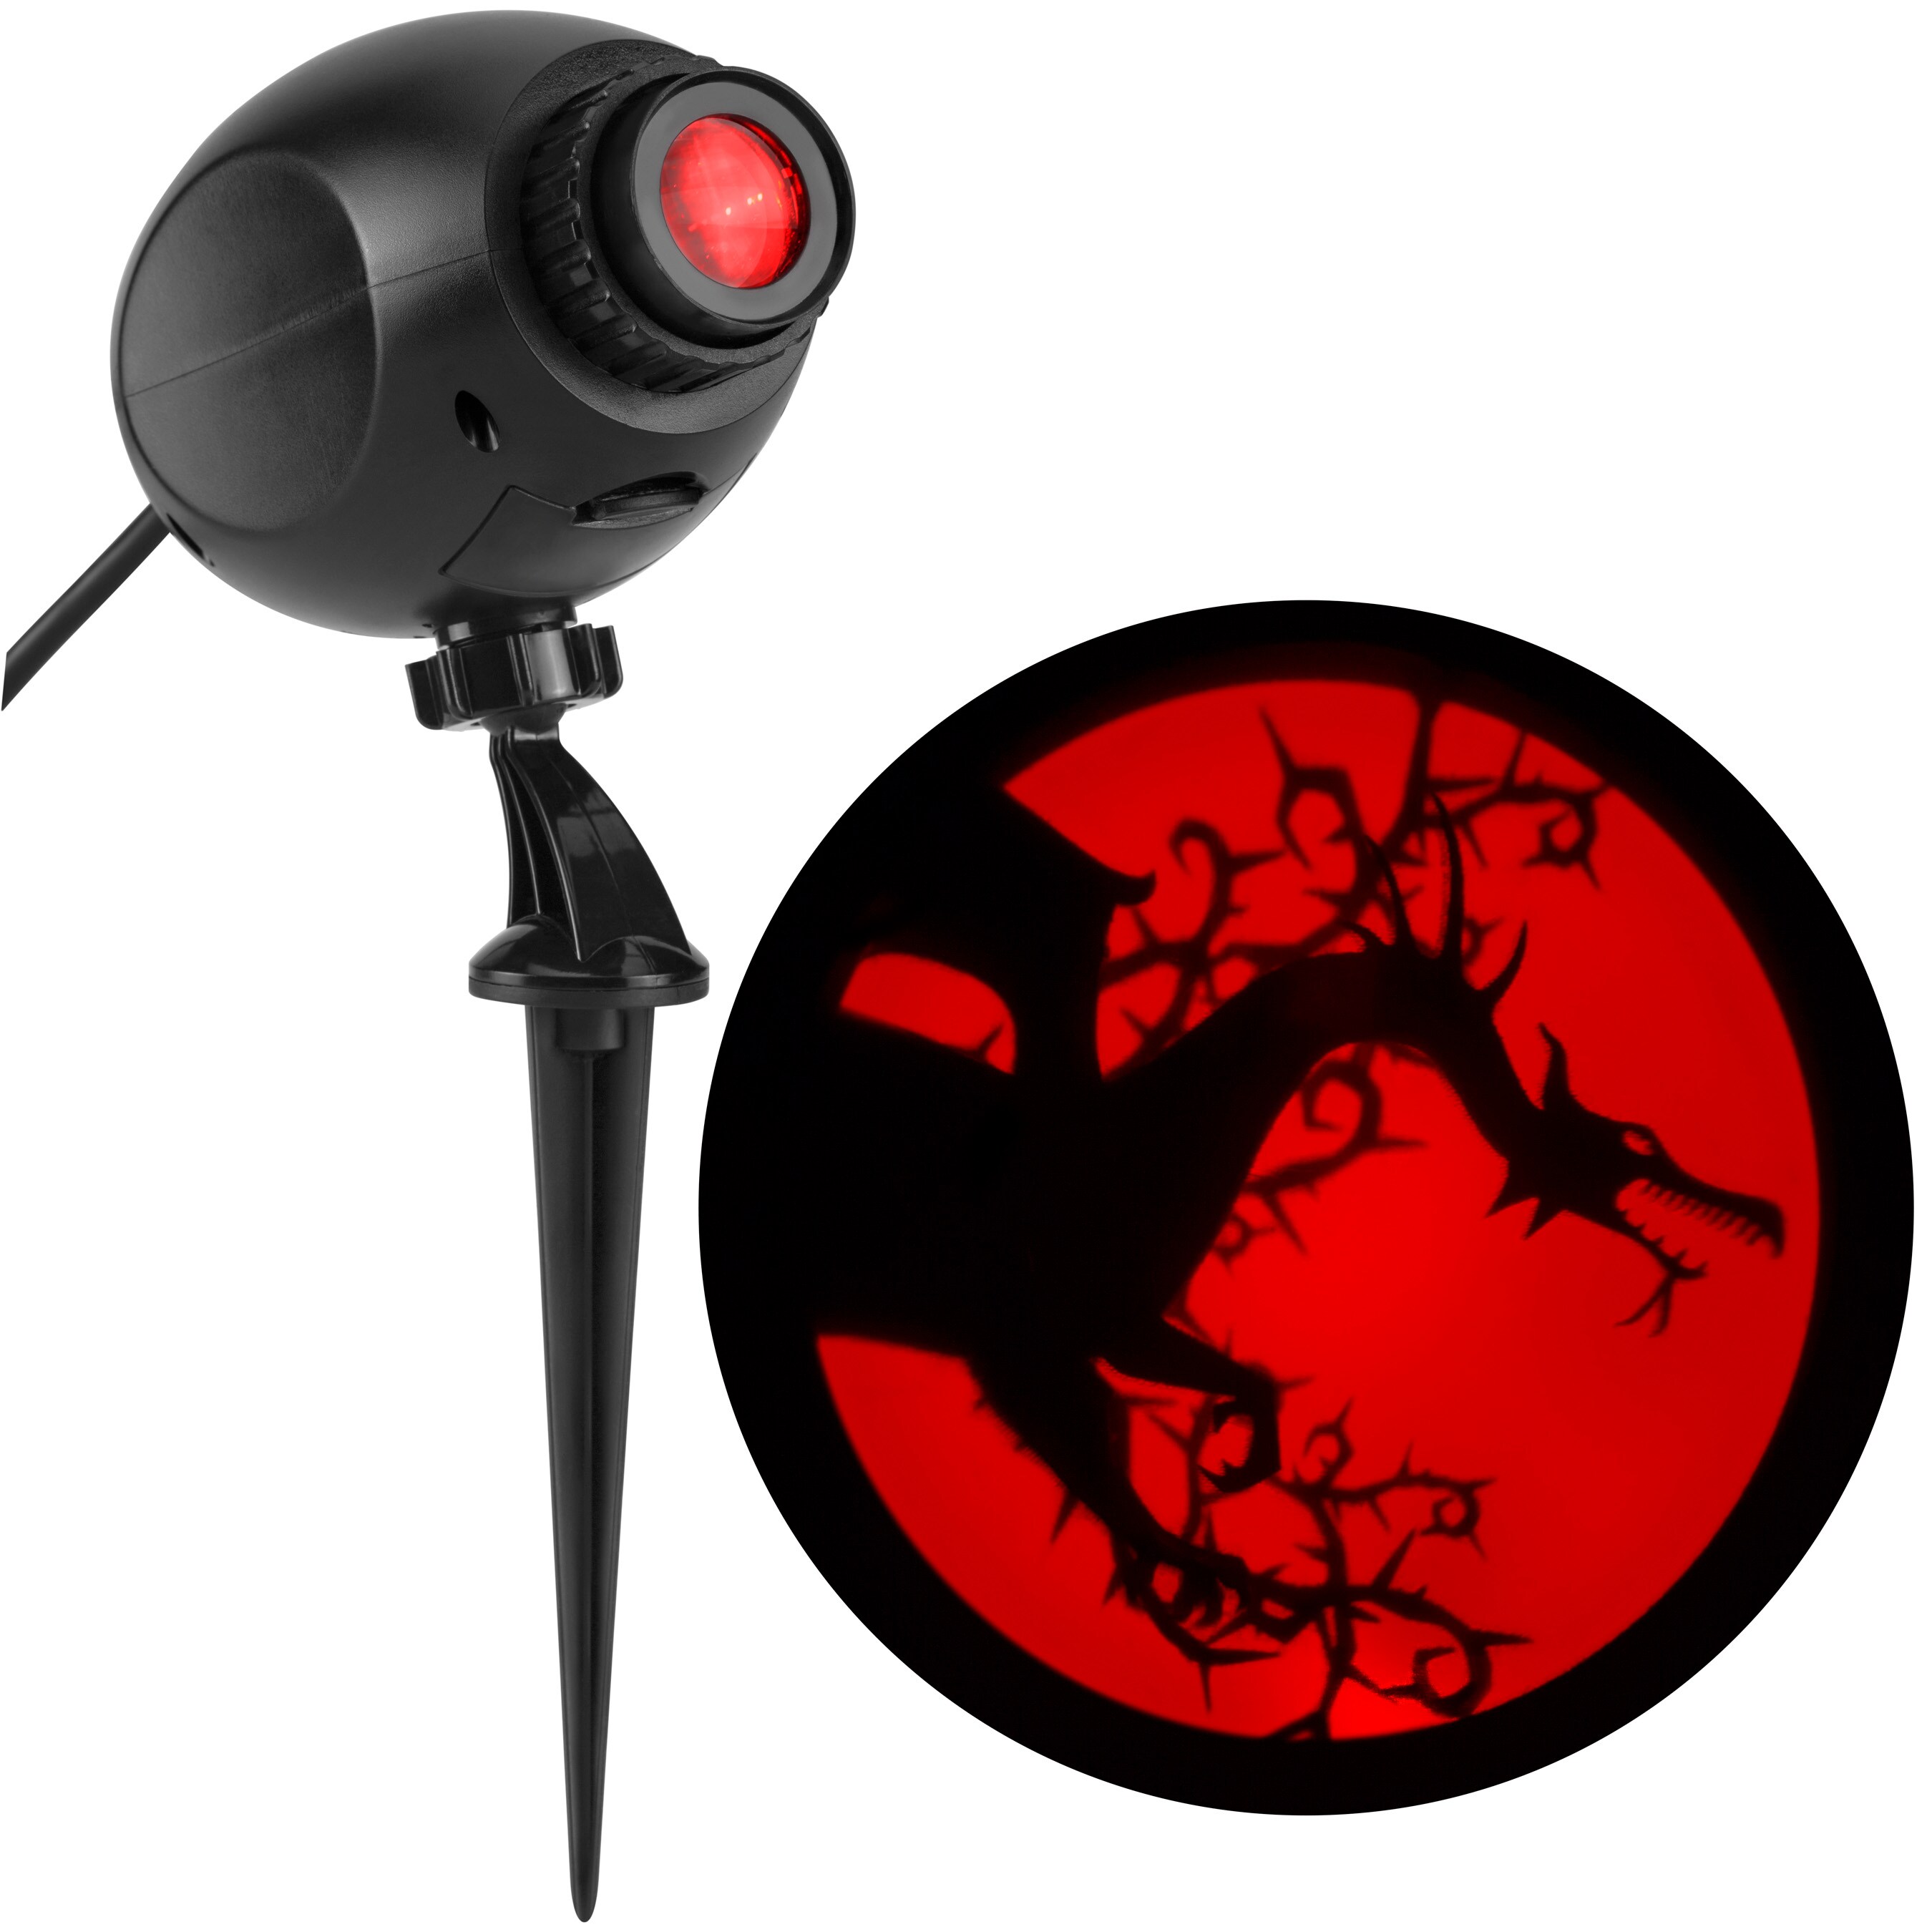 Disney Maleficent LED Halloween Stake Light Projector Holiday House Decor 